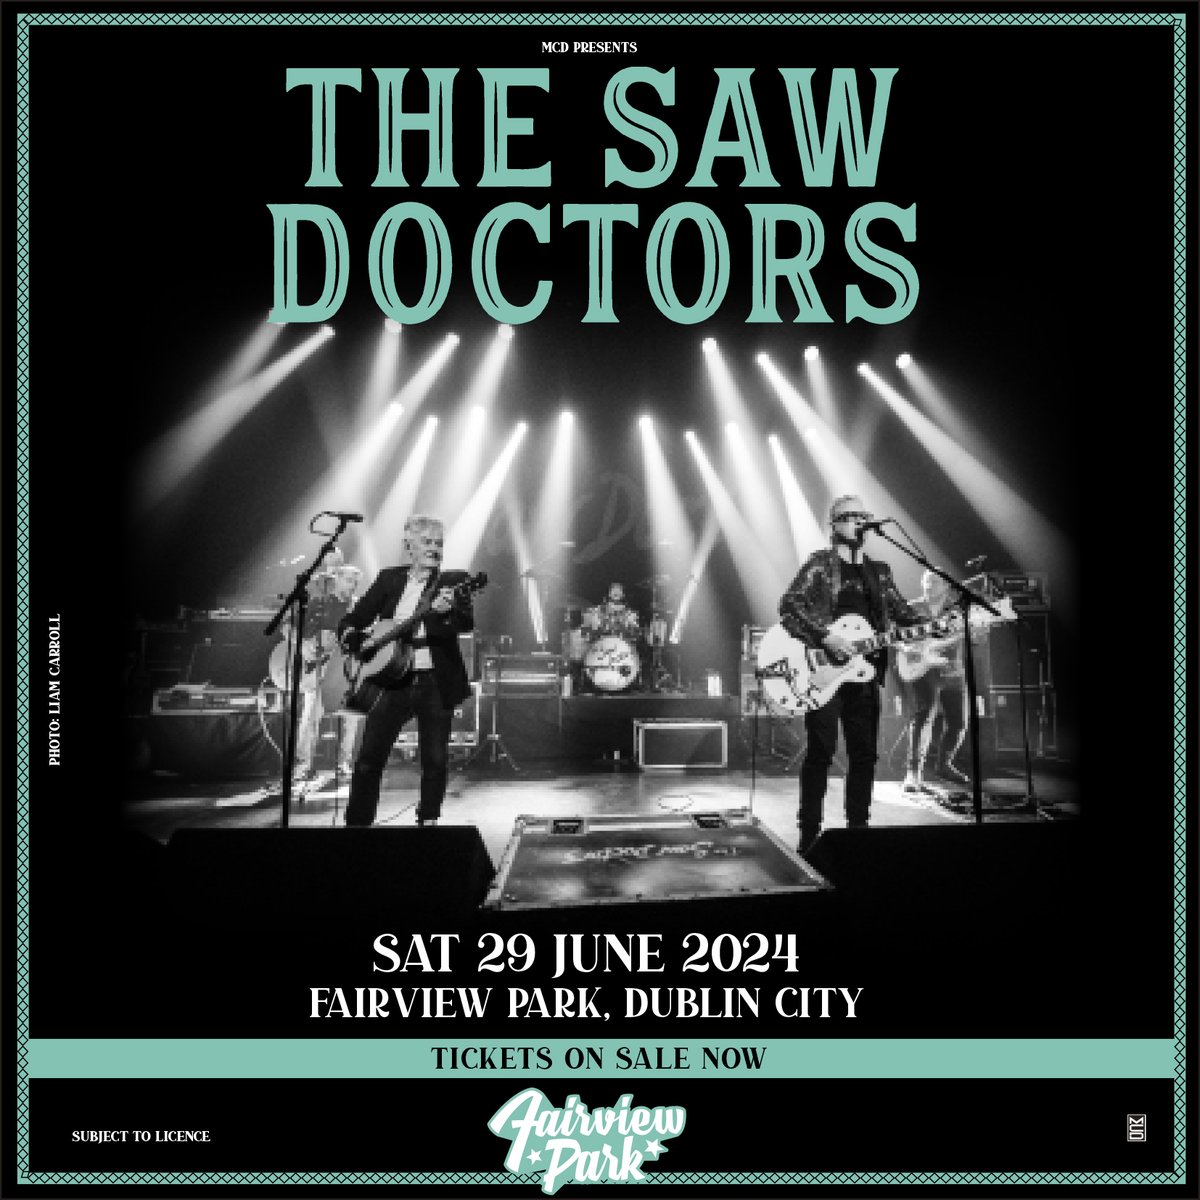 Tonight on @RTEOne 8.00pm @GarryMacDonncha examines the story behind N17 by @sawdoctors which has become an anthem that speaks to the universal experience of longing for home. Limited tickets for The Saw Doctors live at Fairview Park Saturday 29 June ticketmaster.ie/the-saw-doctor…